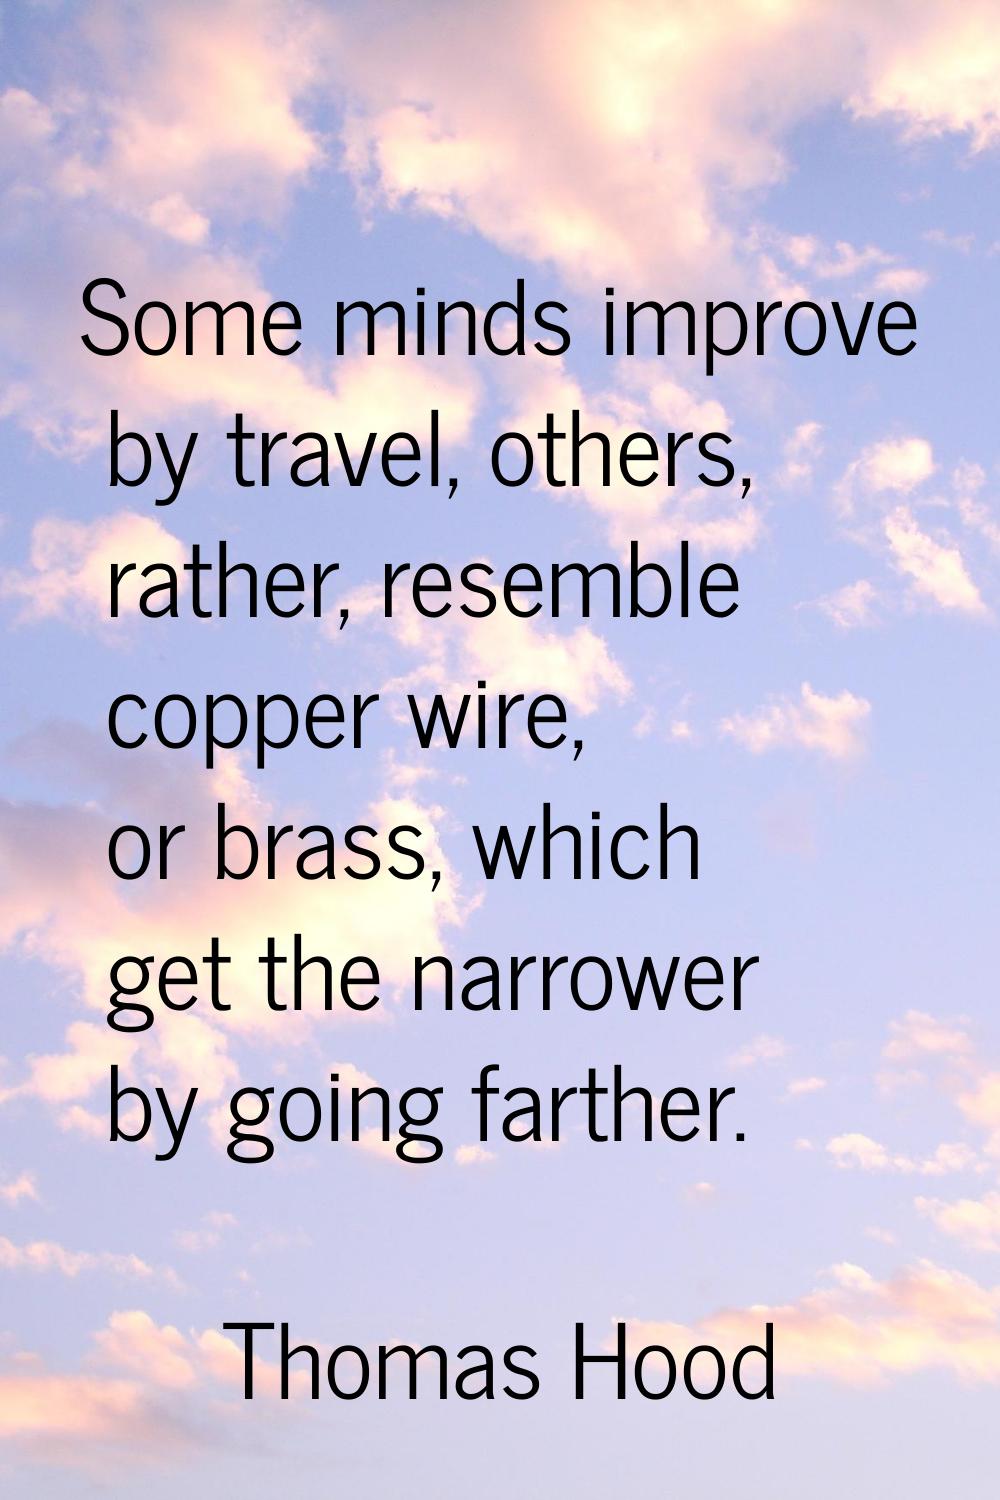 Some minds improve by travel, others, rather, resemble copper wire, or brass, which get the narrowe